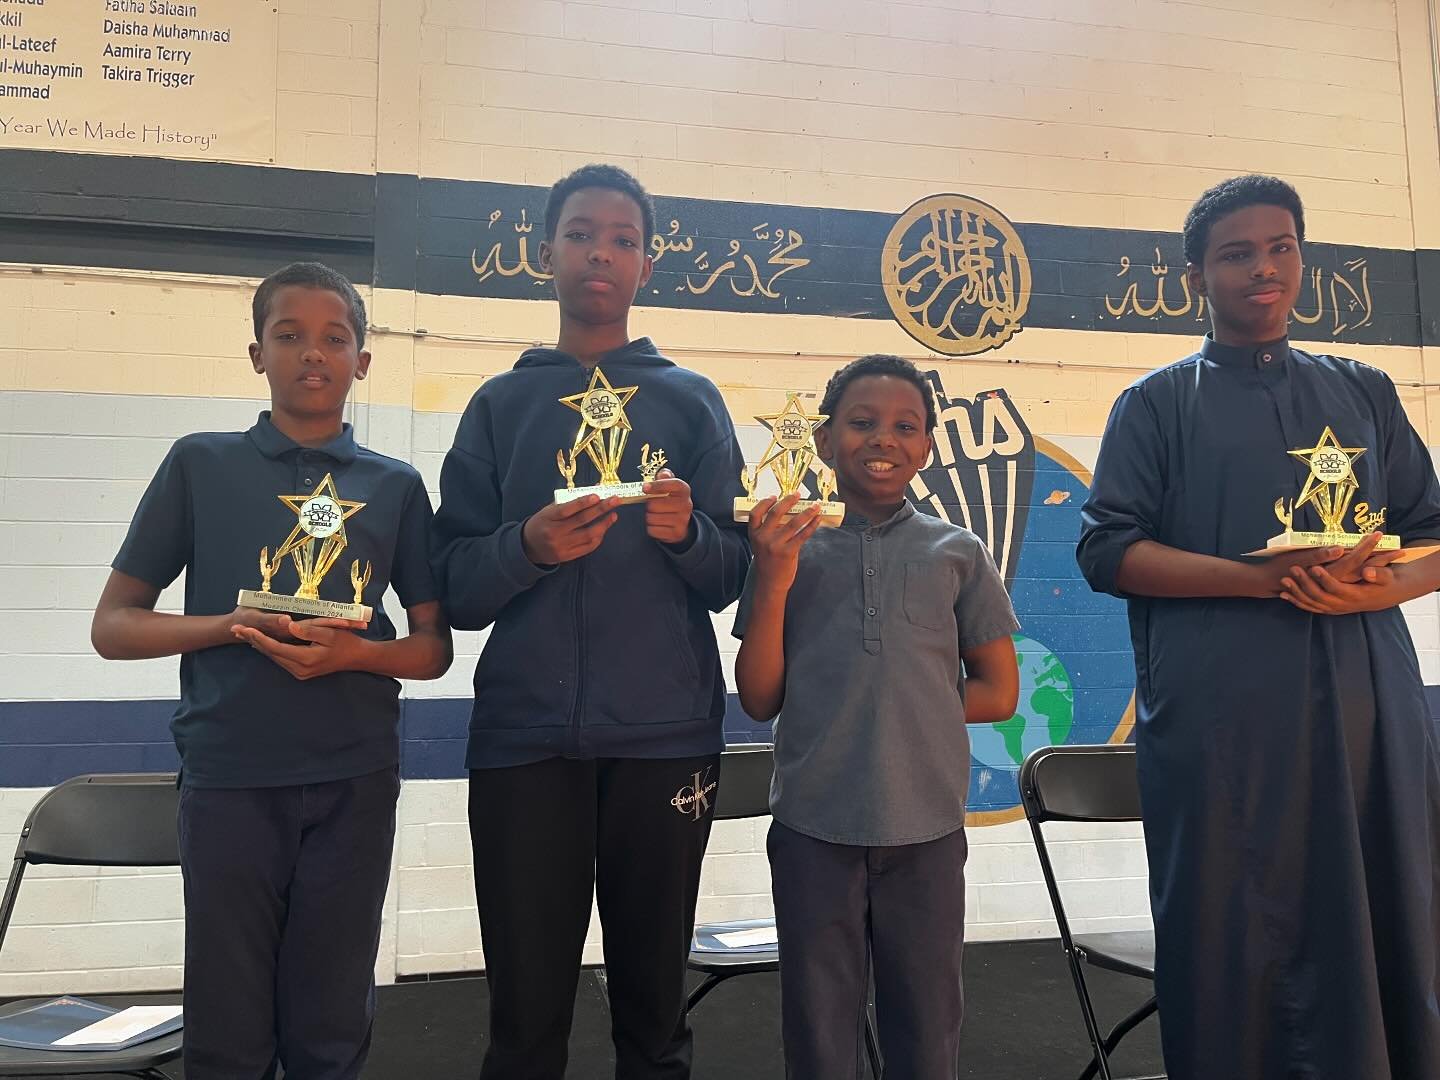 Alhumdulliah and congratulations to our finalists in our annual muezzin competition at MSOA! 1st place winner Abdurrahman Ismail (9th grade), 2nd place winner Kaisan Render (4thgrade), 3rd place winner Salah Elmi (7th grade), and 4th place winner Har